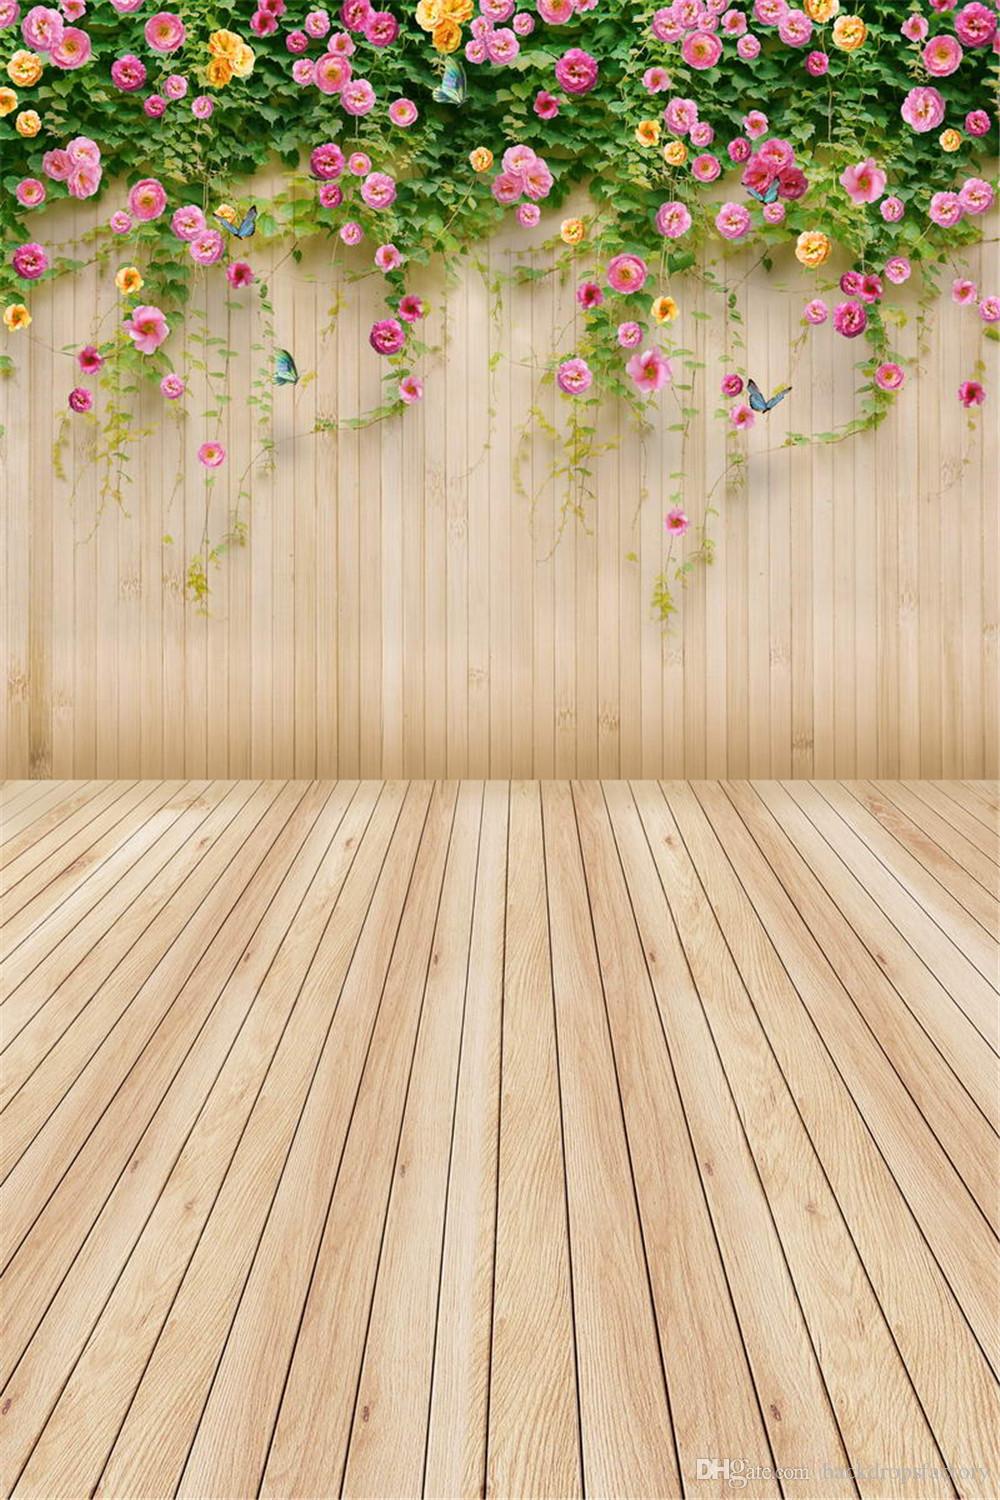 2022 Pink Yellow Flower Children Kids Spring Background Green Vines Wood Wall Floor Photography Backdrop Plank Baby Newborn Photo Shoot Wallpaper From Backdropsfactory, $17.57